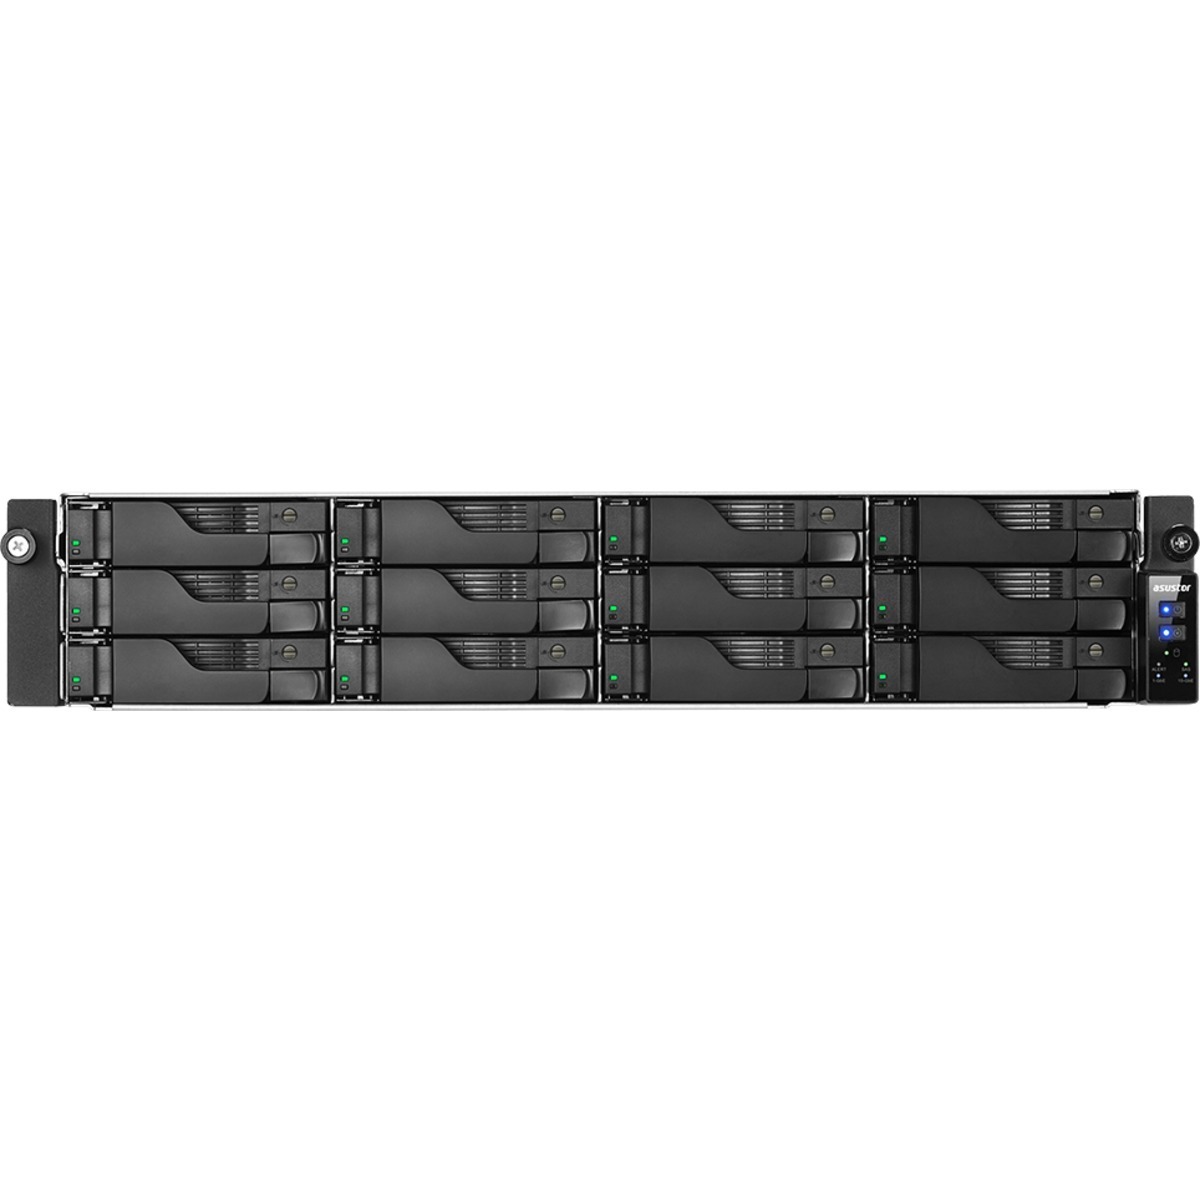 buy $5201 ASUSTOR AS7112RDX Lockerstor 12R Pro 48tb RackMount NAS - Network Attached Storage Device 12x4000gb Western Digital Blue WD40EZRZ 3.5 5400rpm SATA 6Gb/s HDD CONSUMER Class Drives Installed - Burn-In Tested - nas headquarters buy network attached storage server device das new raid-5 free shipping usa christmas new year holiday sale AS7112RDX Lockerstor 12R Pro